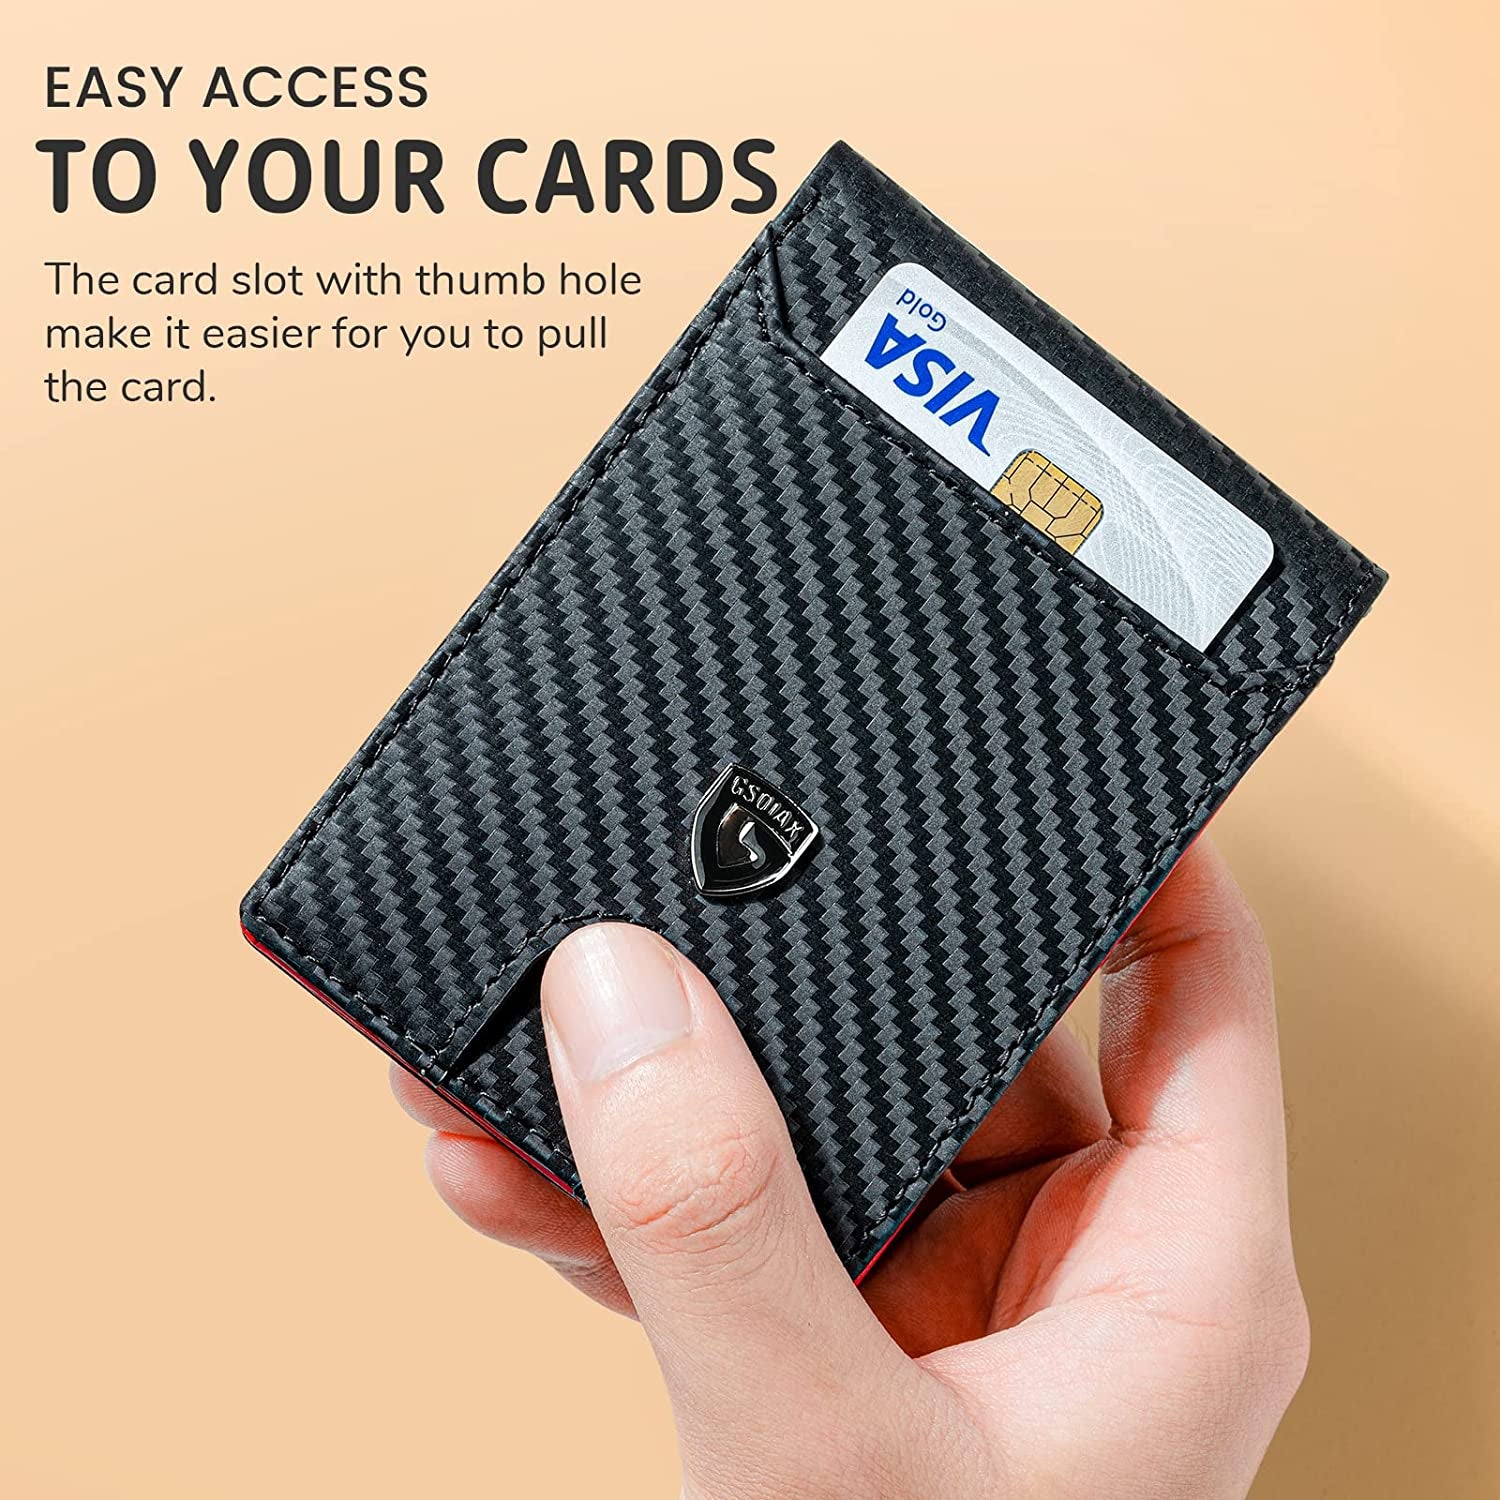 Men's RFID Blocking Slim Bifold Wallet in Genuine Leather with Carbon Fiber Card Holder and Money Clip